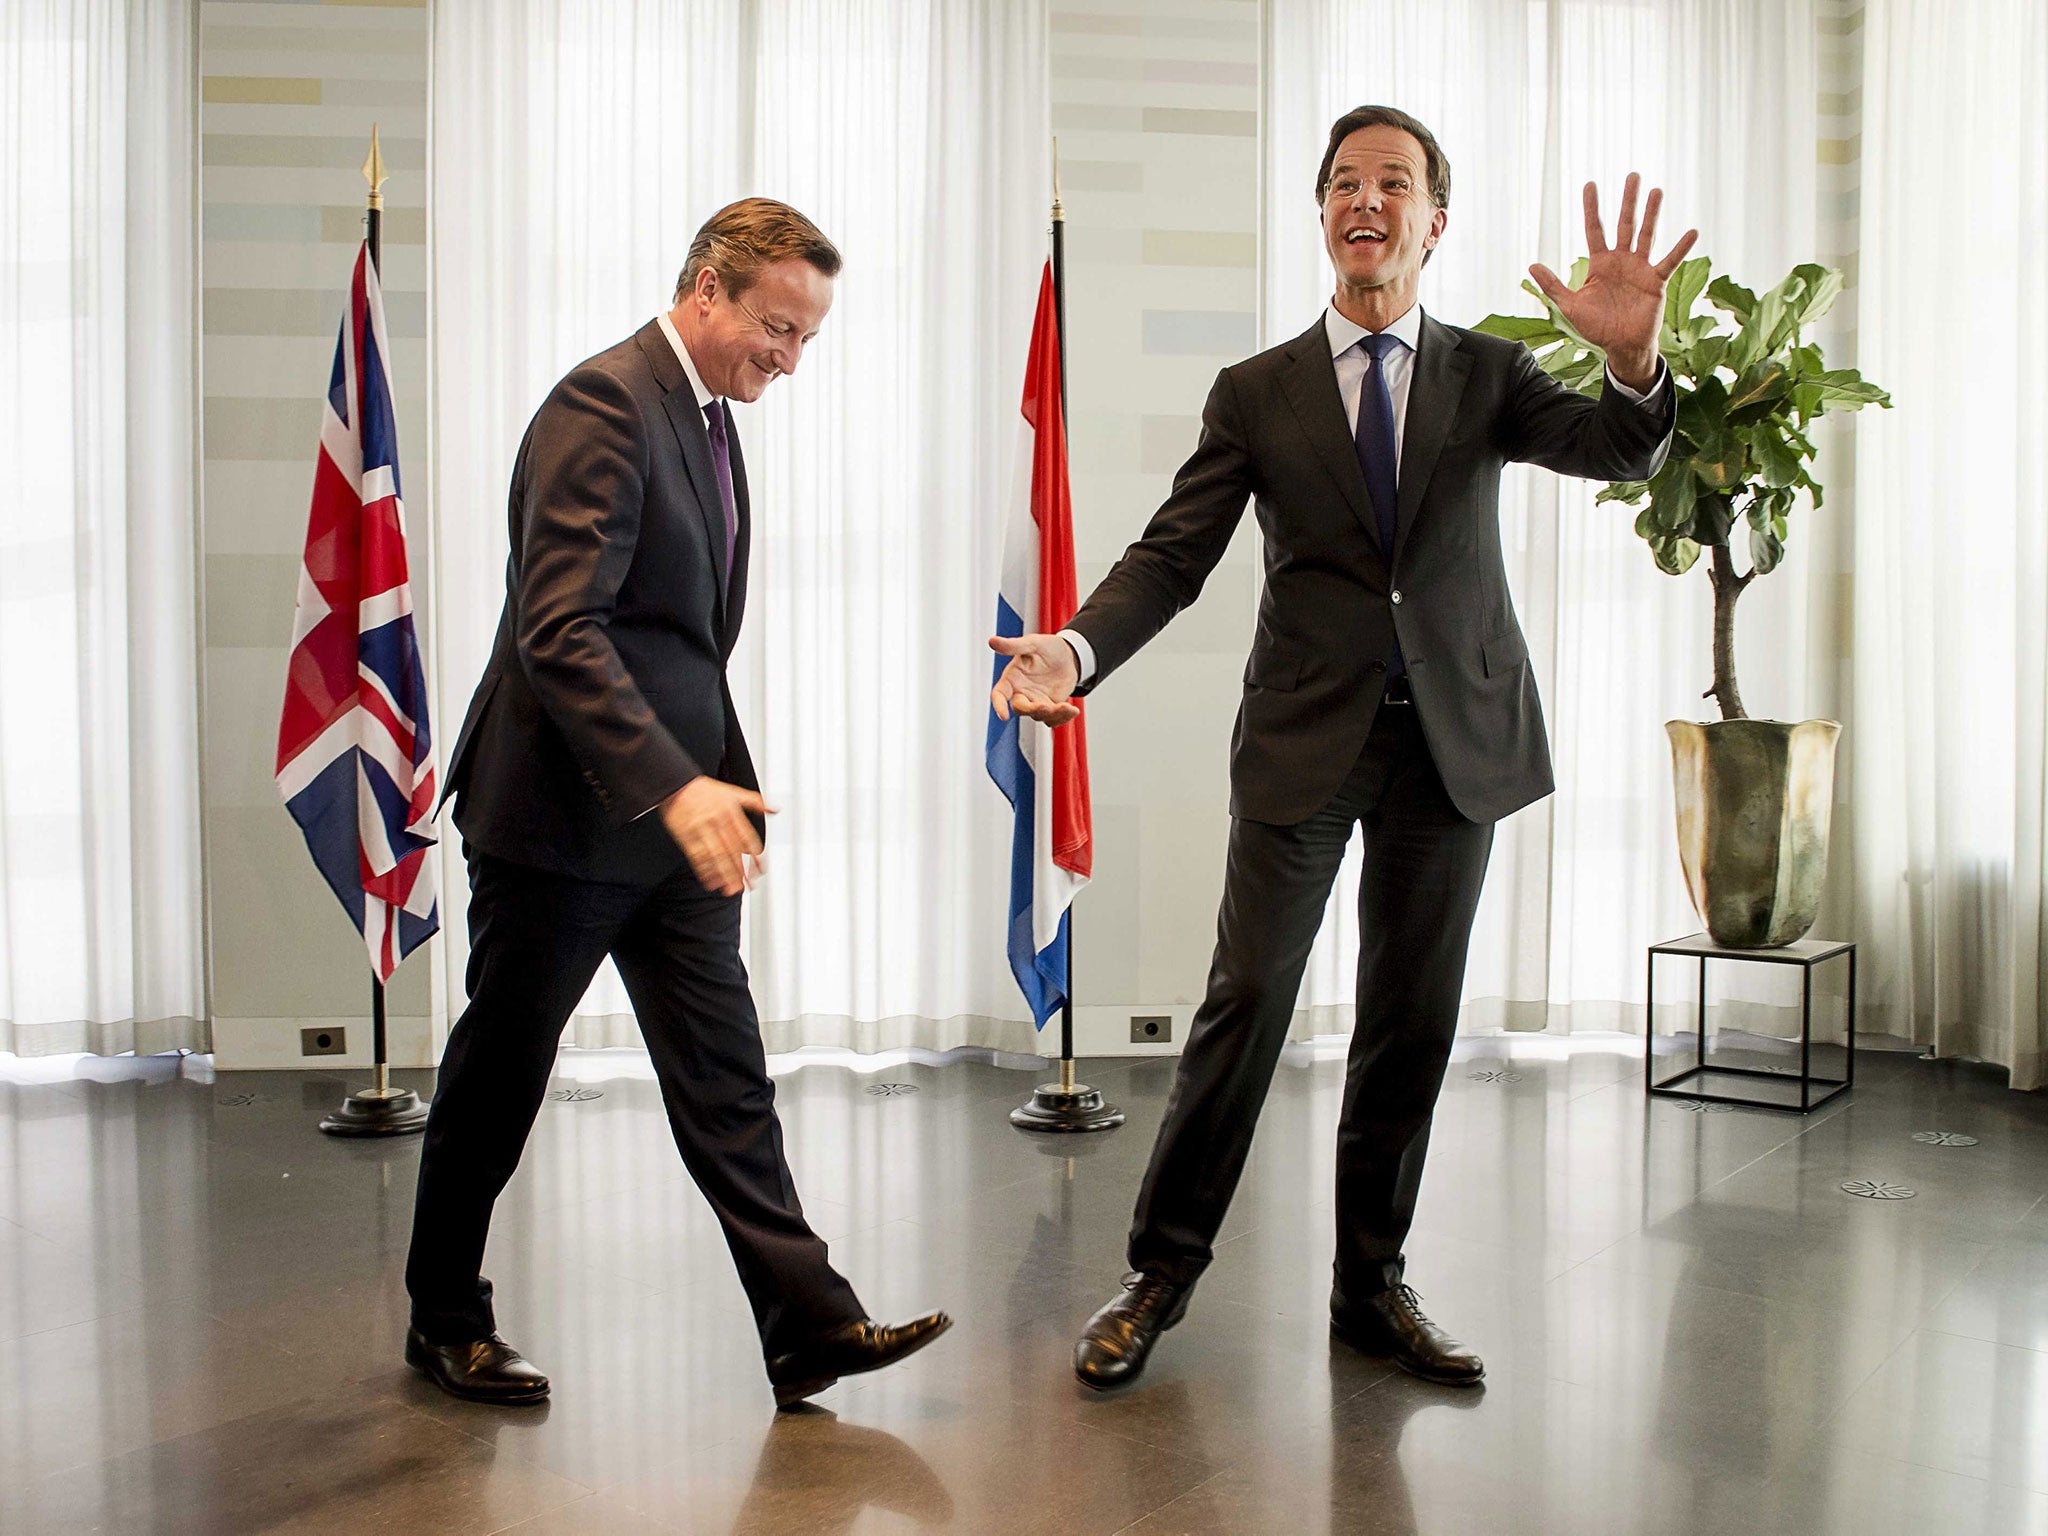 Mark Rutte, right, the Prime Minister of The Netherlands, welcomes David Cameron to The Hague